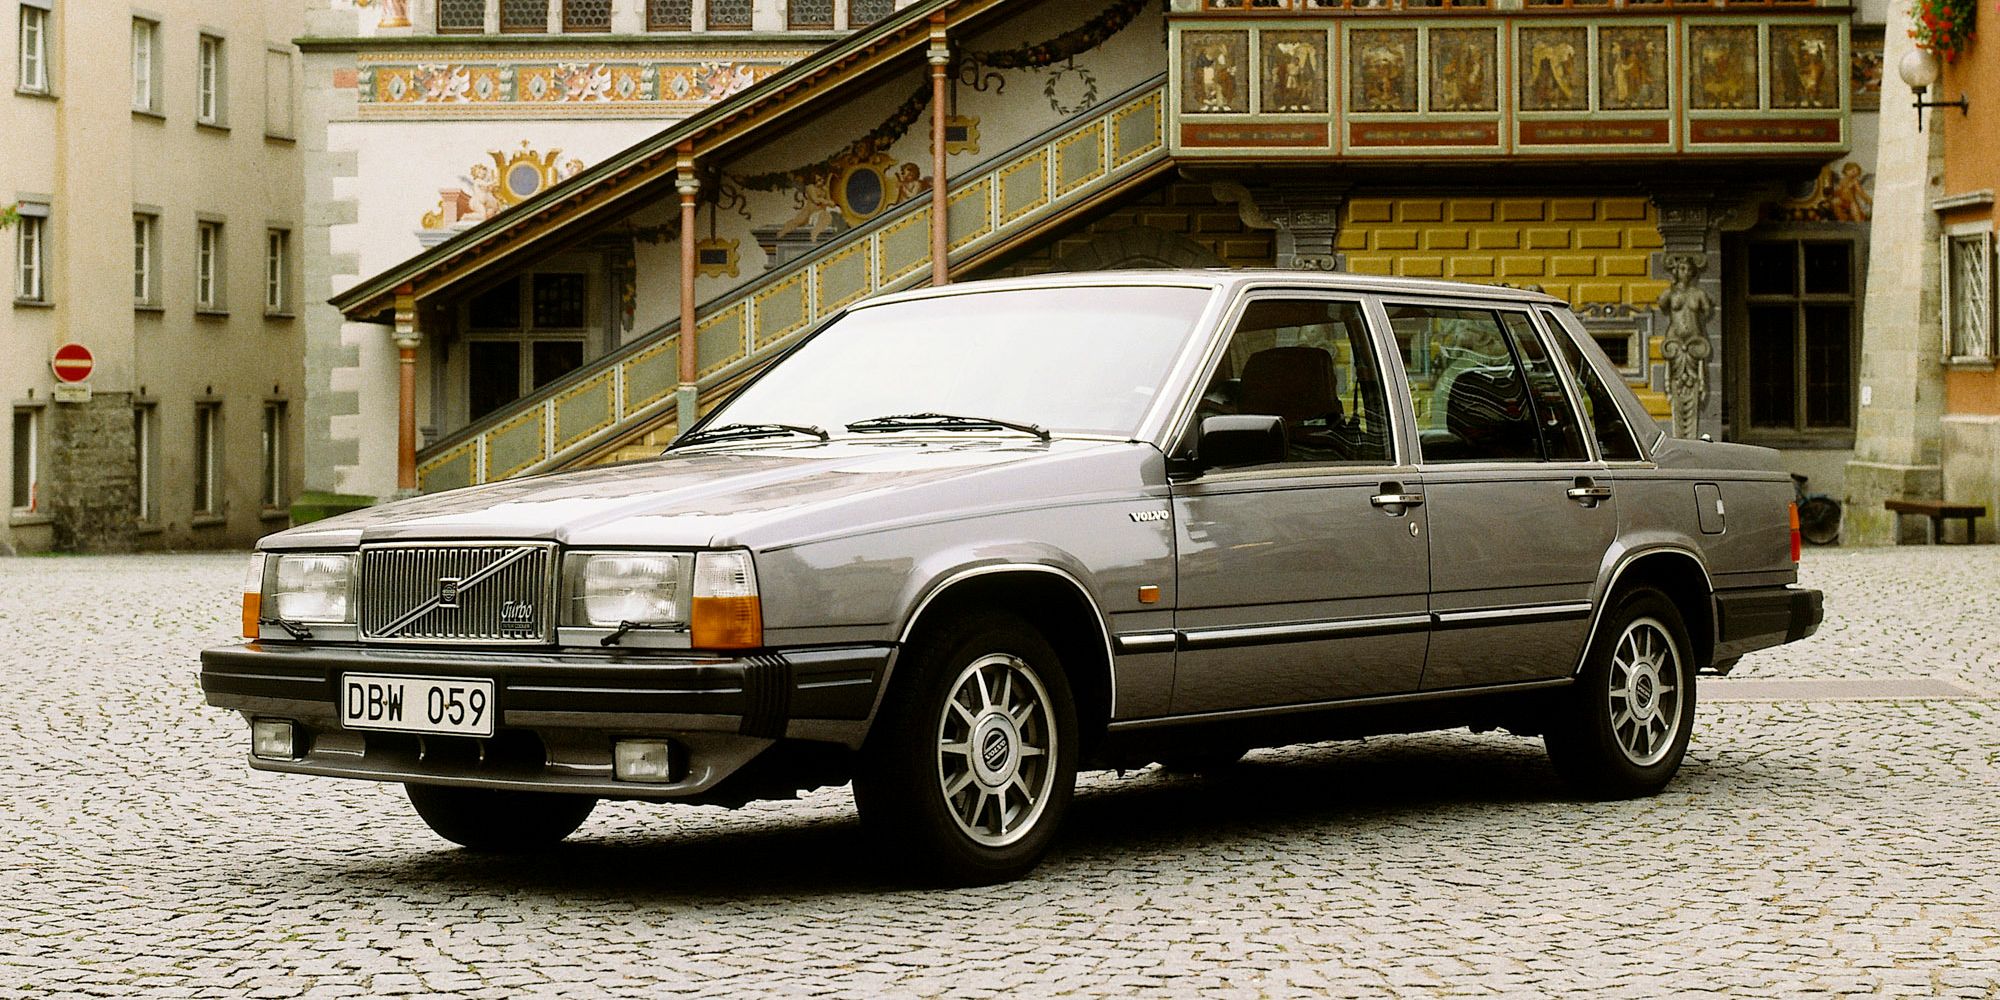 The front of the Volvo 760 Sedan